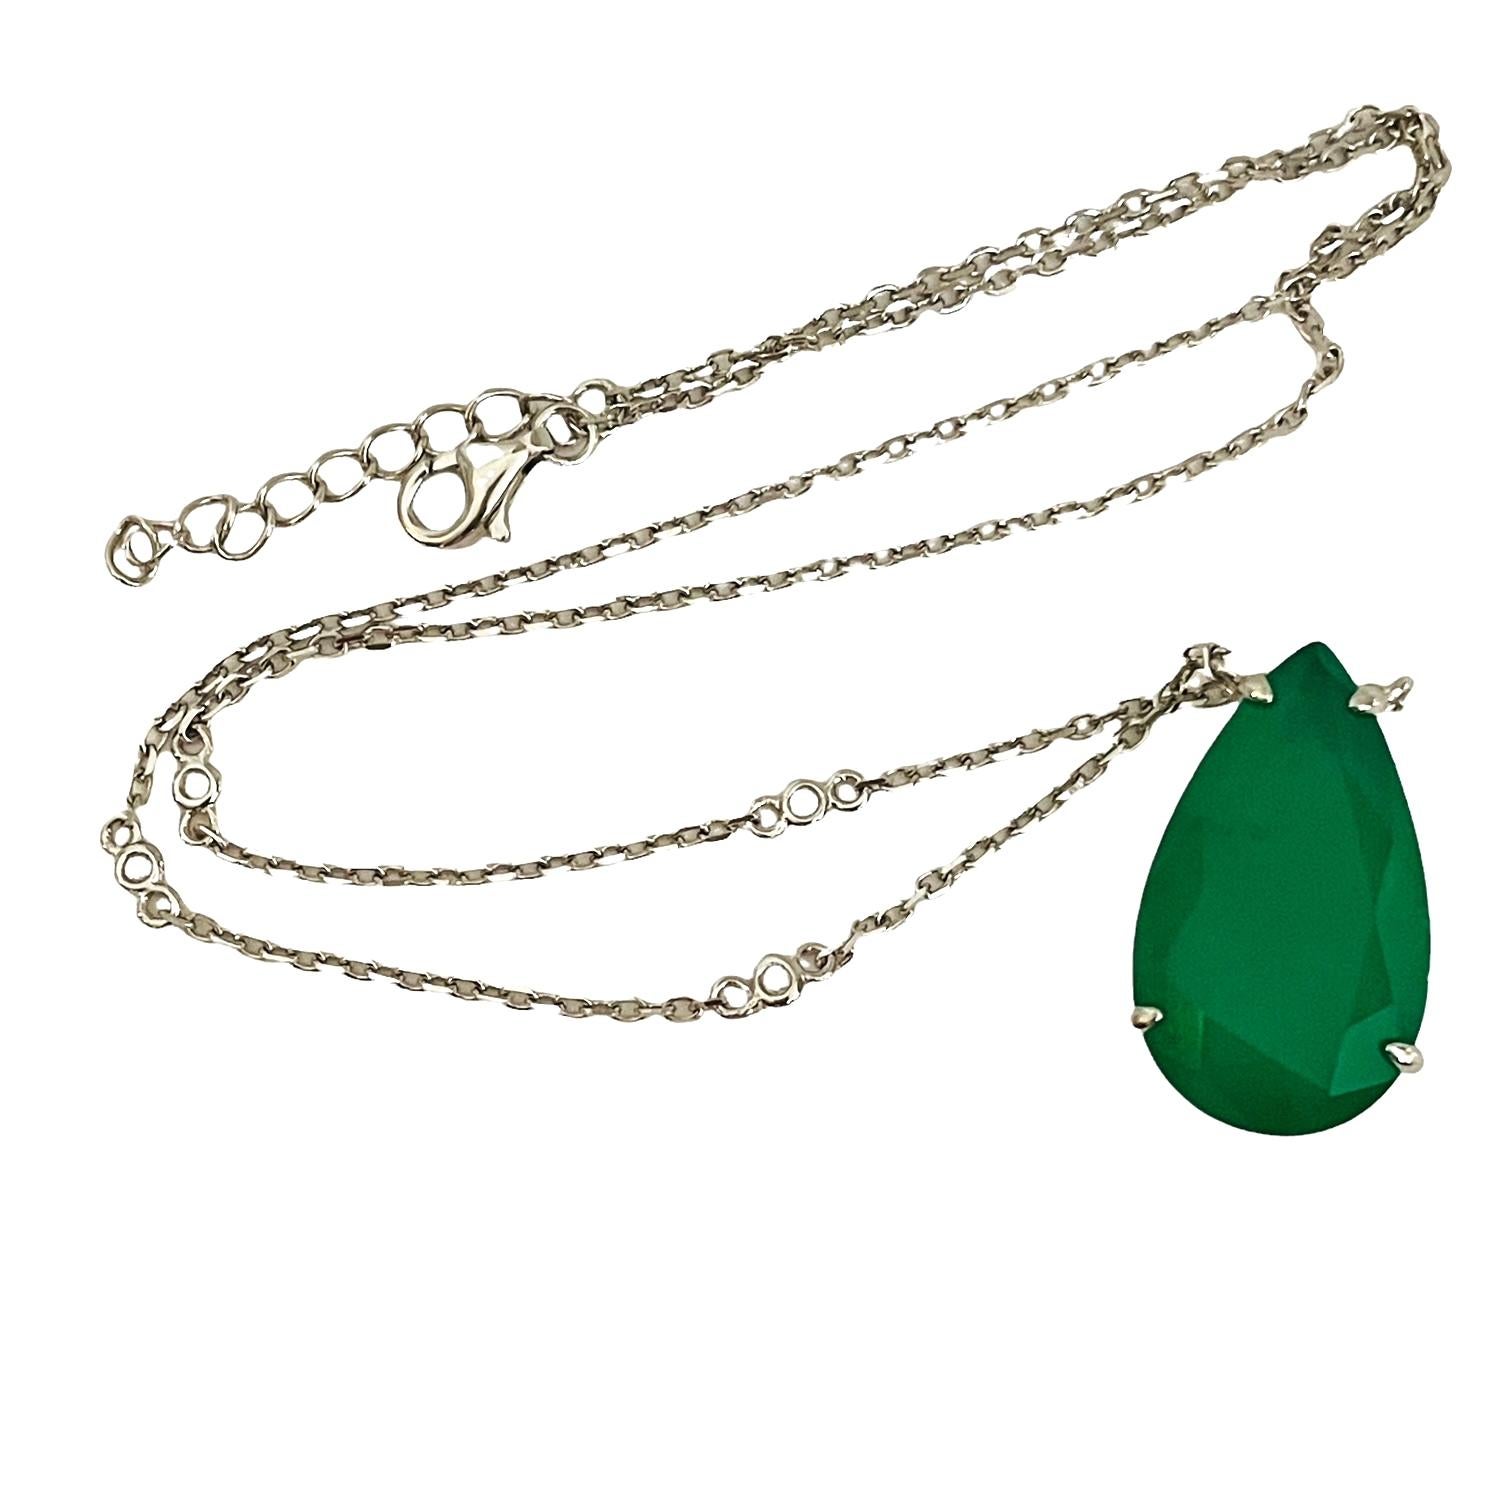 New Natural Forest Green Aventurine Doublet Sterling Necklace and Pendant For Sale 5